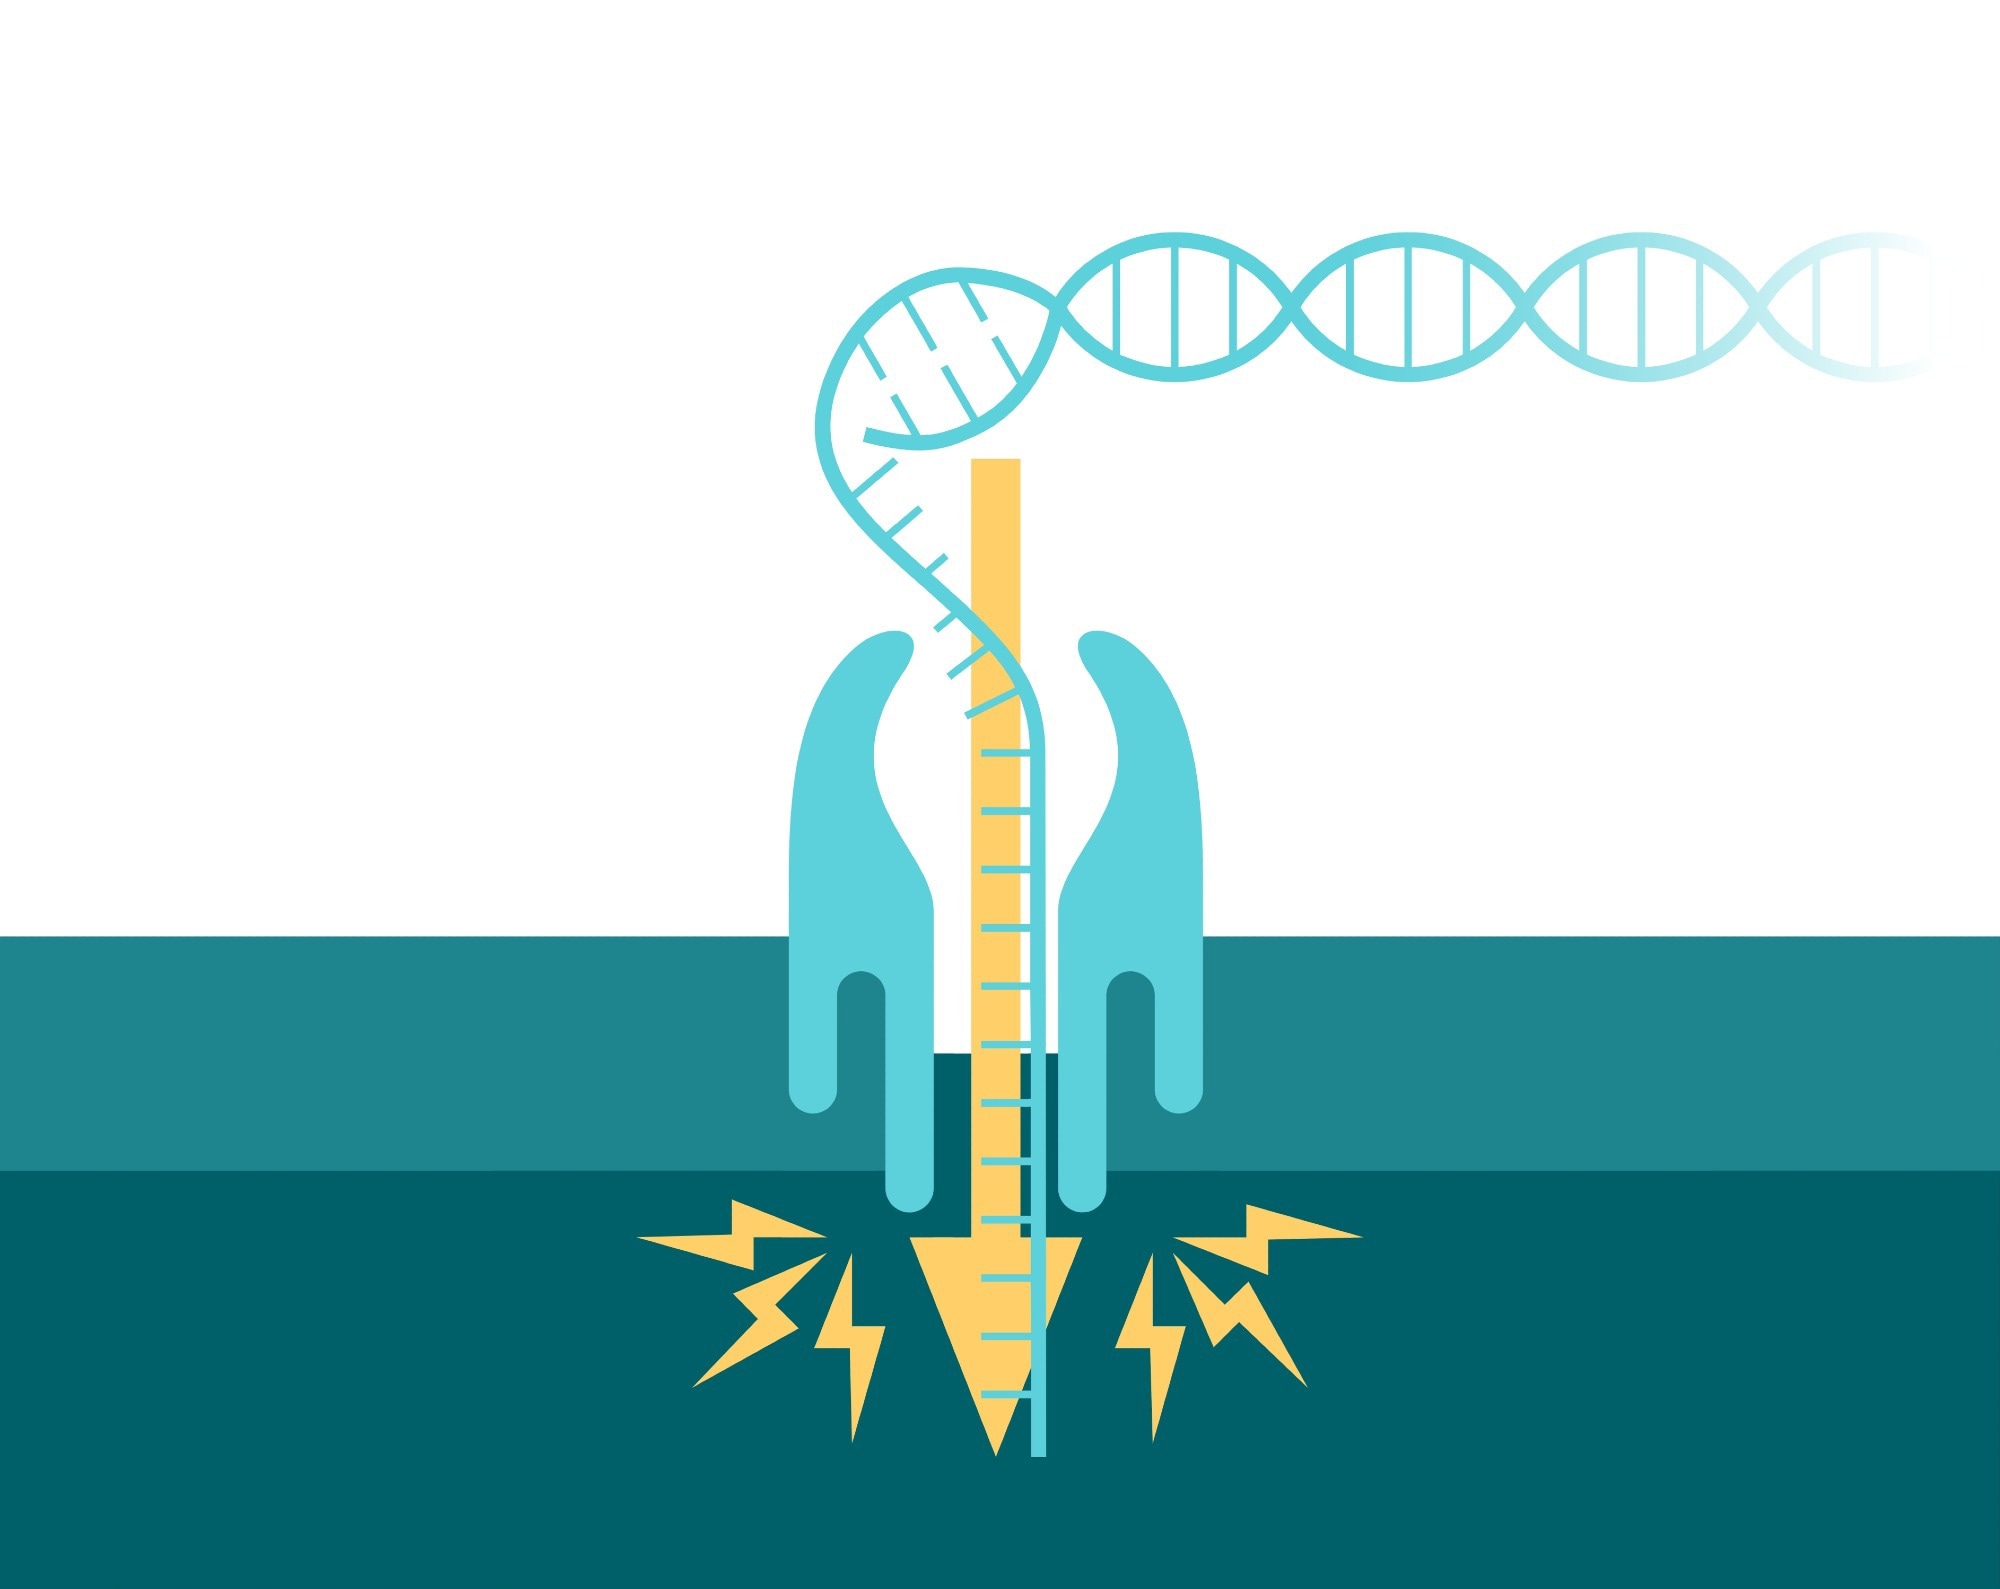 Electrical signal is generated from DNA passing through a nanopore channel. Vector illustration for visual aids